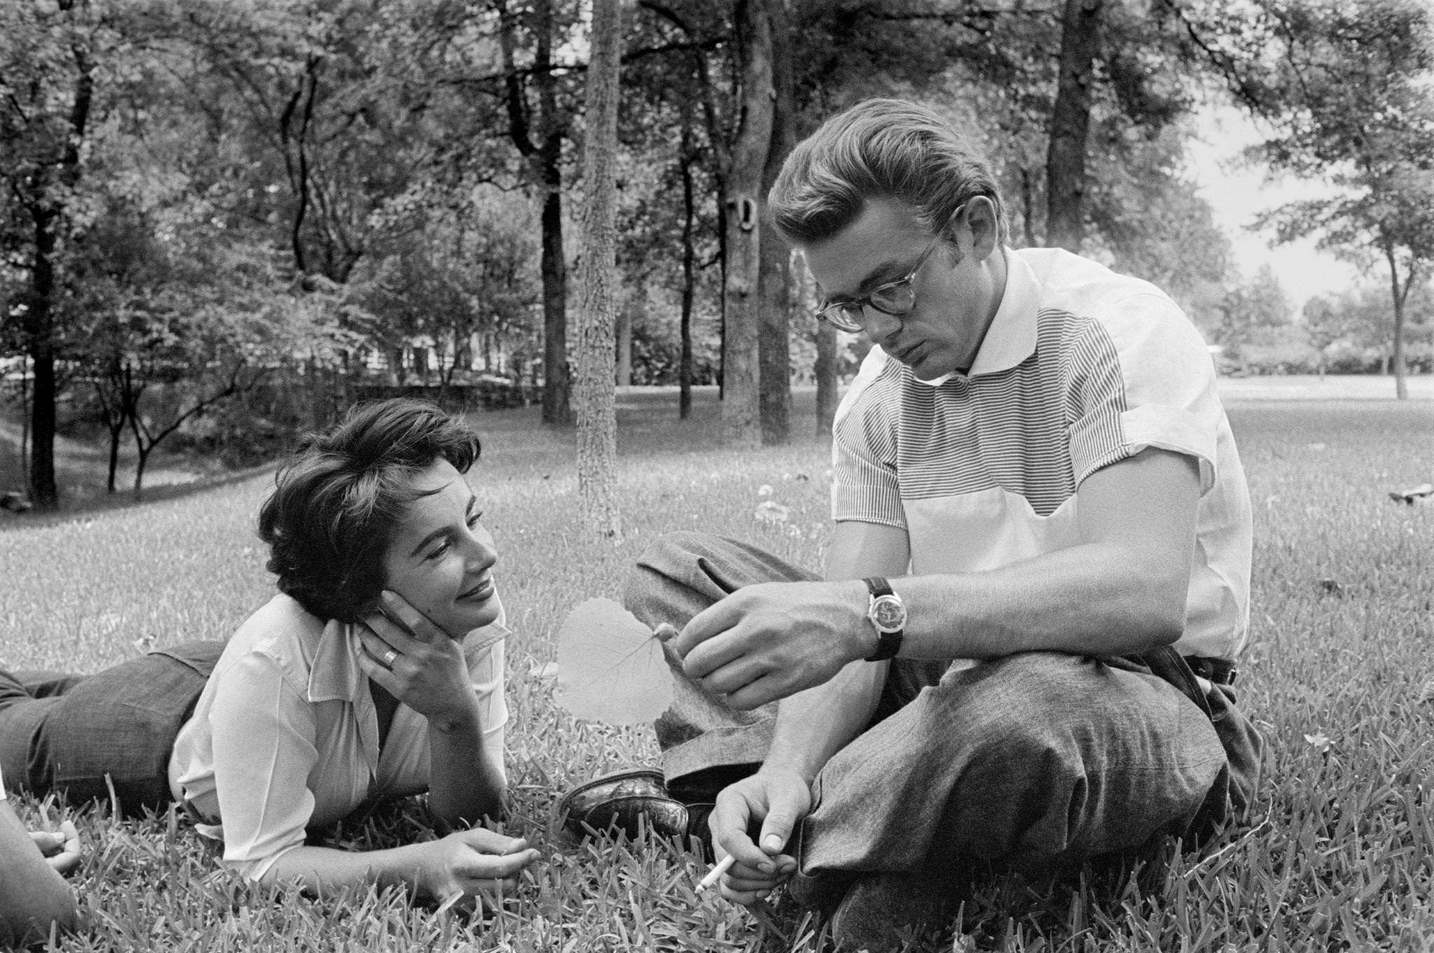 James Dean And Liz Taylor During The Filming of "Giant", 1955